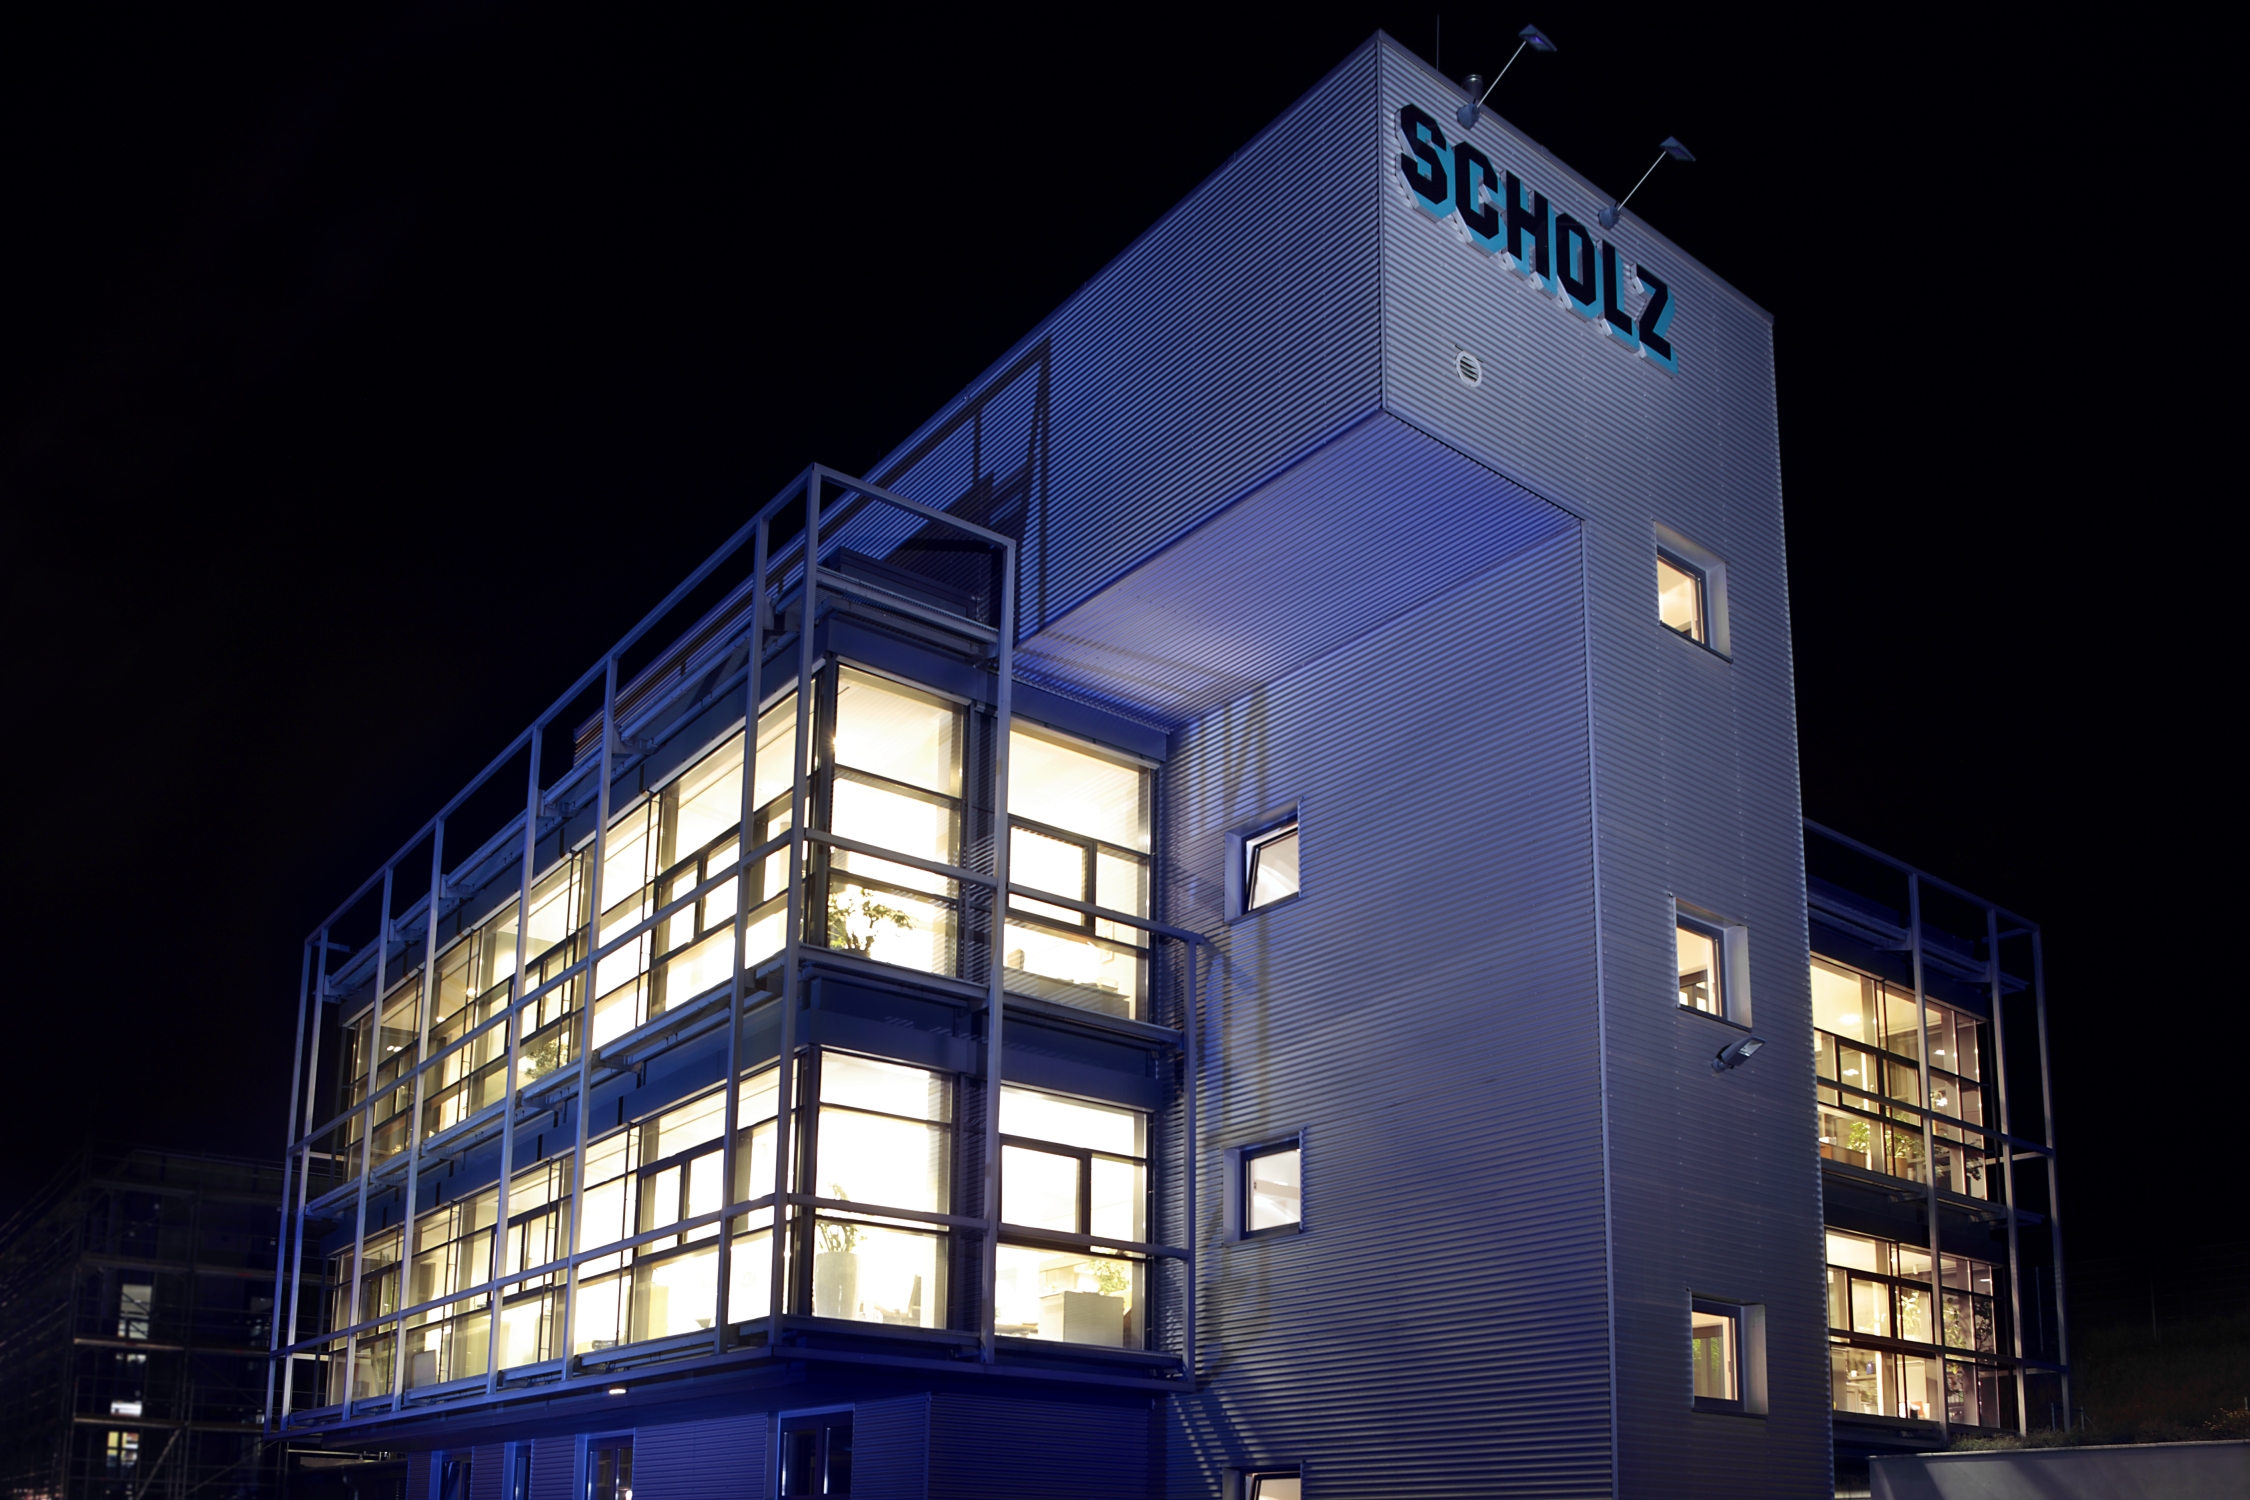 Night photo of Scholz Recycling's headquarters in Essingen, Germany